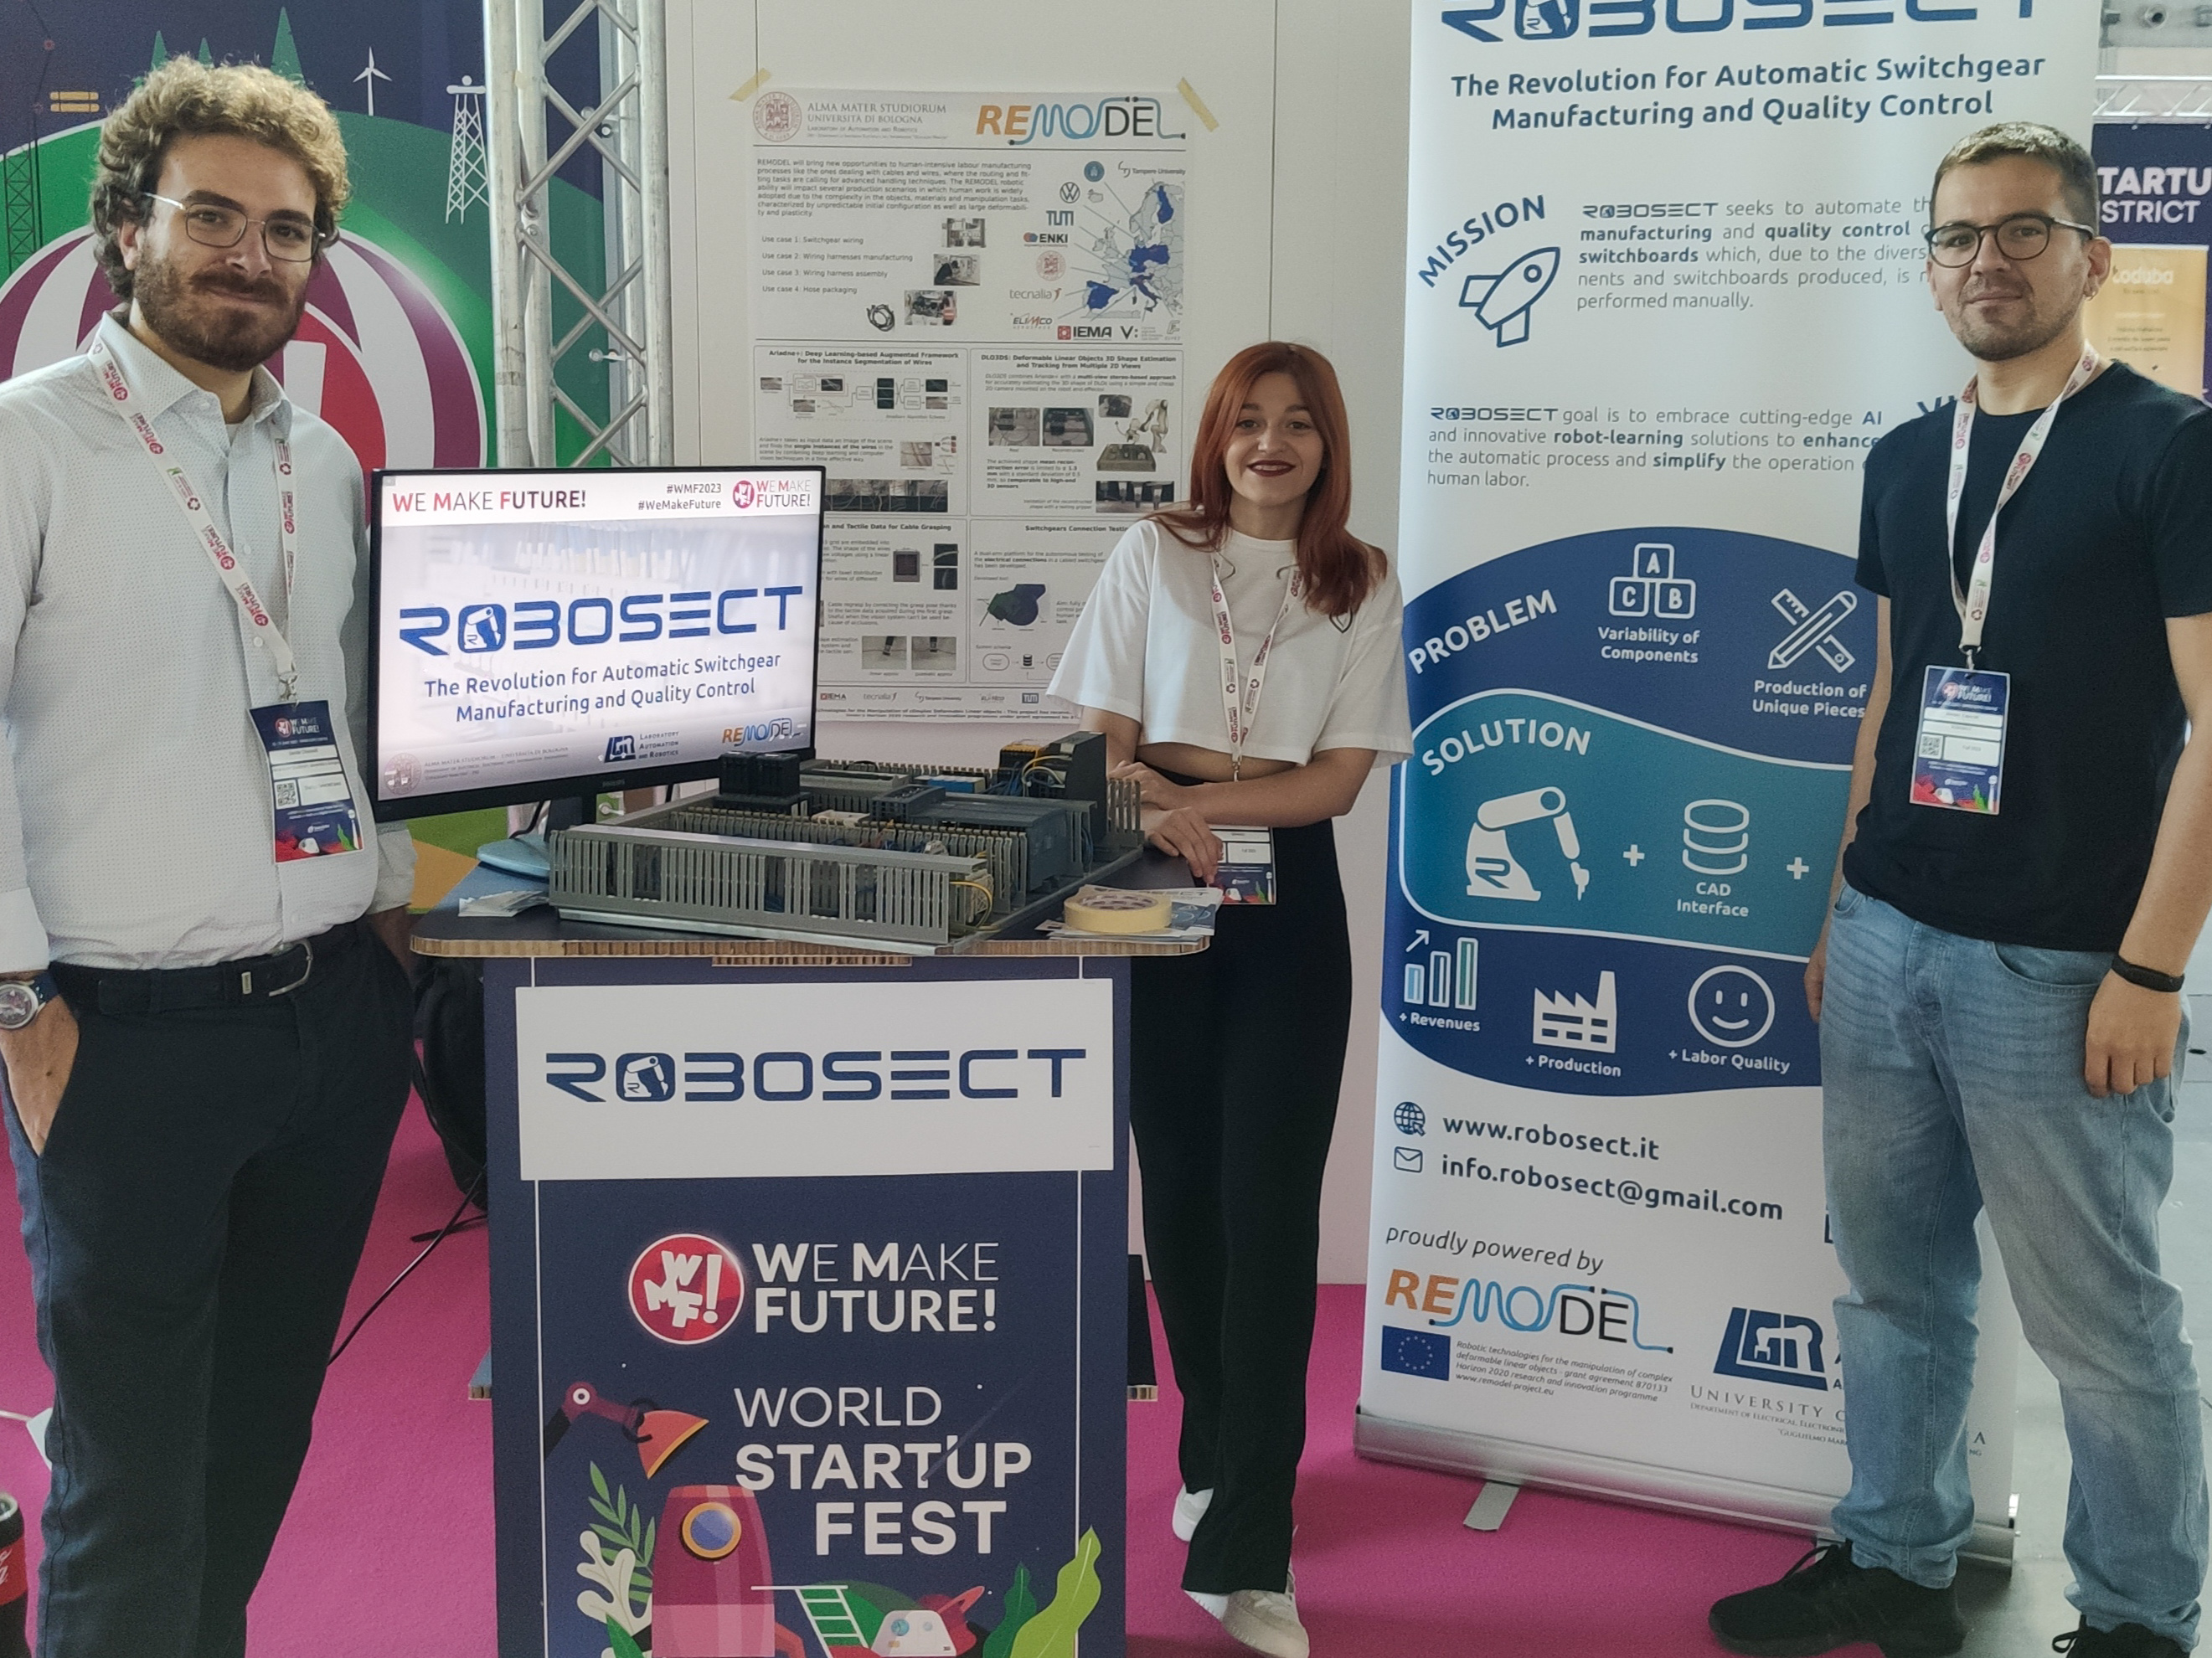 ROBOSECT at WeMakeFuture 2023 Innovation Event (Rimini, Italy)